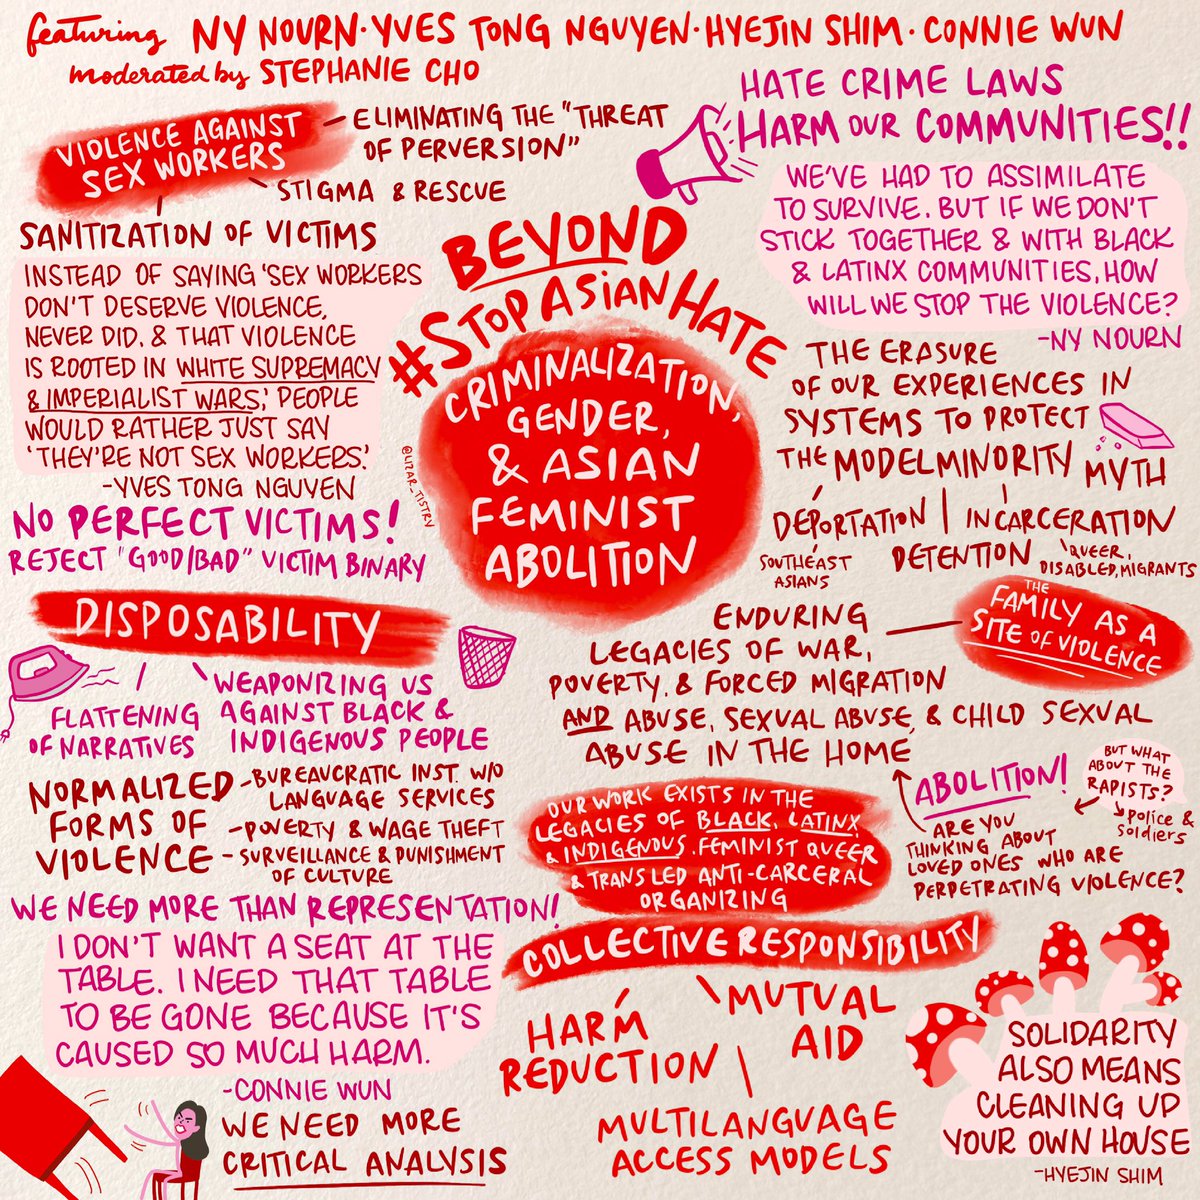 Hate crime laws harm our communities!

Notes (not sponsored or endorsed) on the AMAZING “Beyond #StopAsianHate ” panel with @nynourn and @hyejinhere of @survivepunish, @yvesandthemoon of @RedCanarySong, and @conniewunphd of @AAPIWomenLead. Video at @haymarketbooks YouTube!